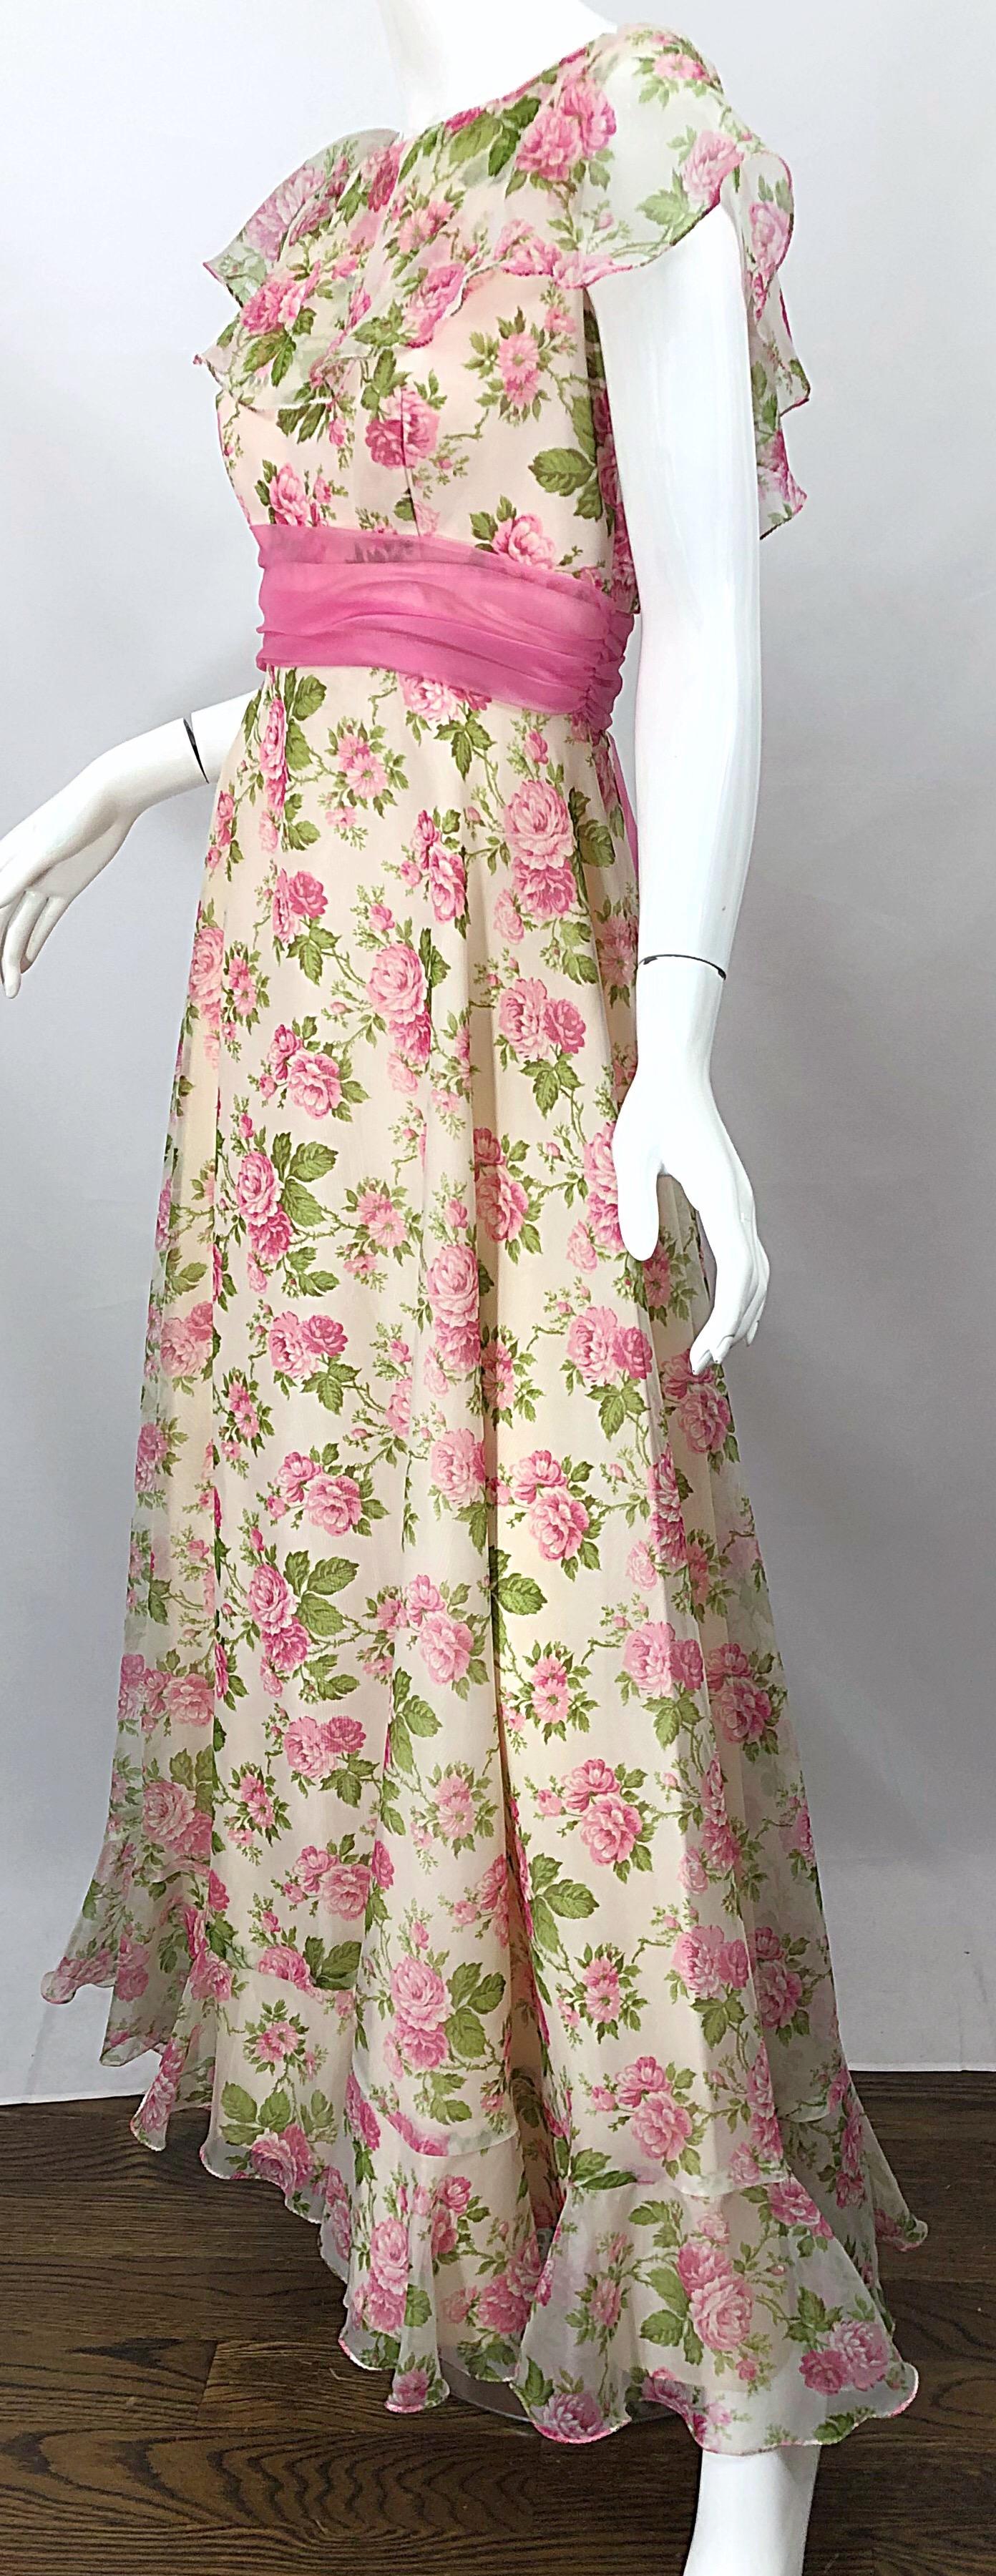 Sylvia Ann 1970s Rose Print Pink Ivory Chiffon Vintage 70s Maxi Dress Gown For Sale 4